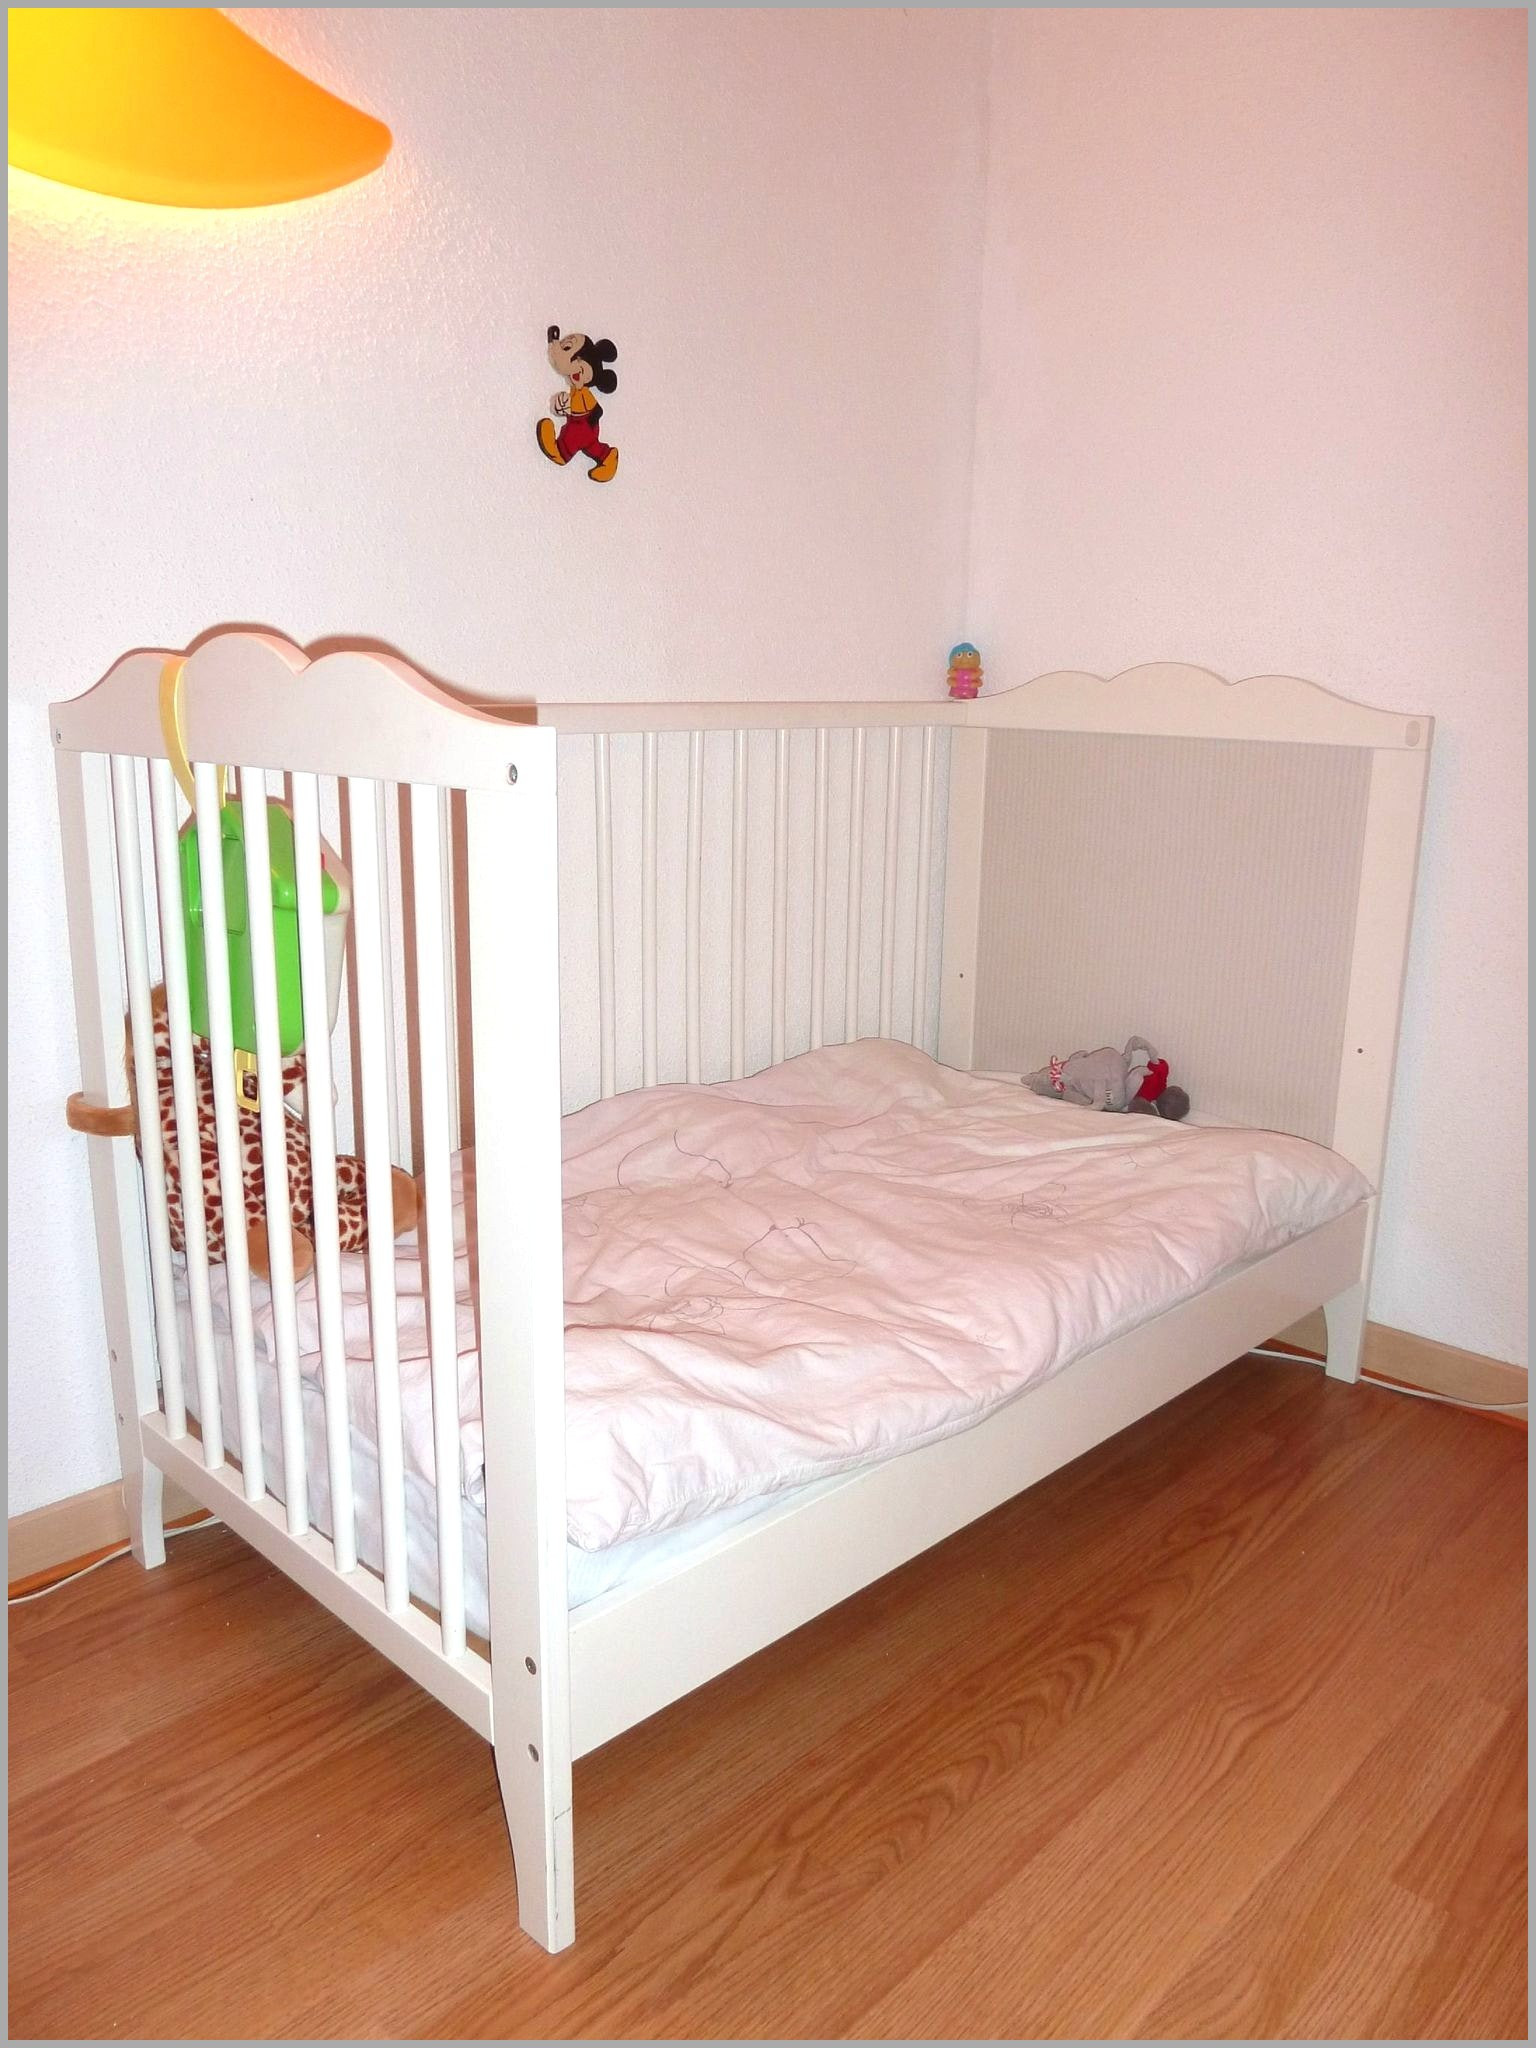 luxe canape darty 20 luxury chambre bebe carrefour bonnes idees